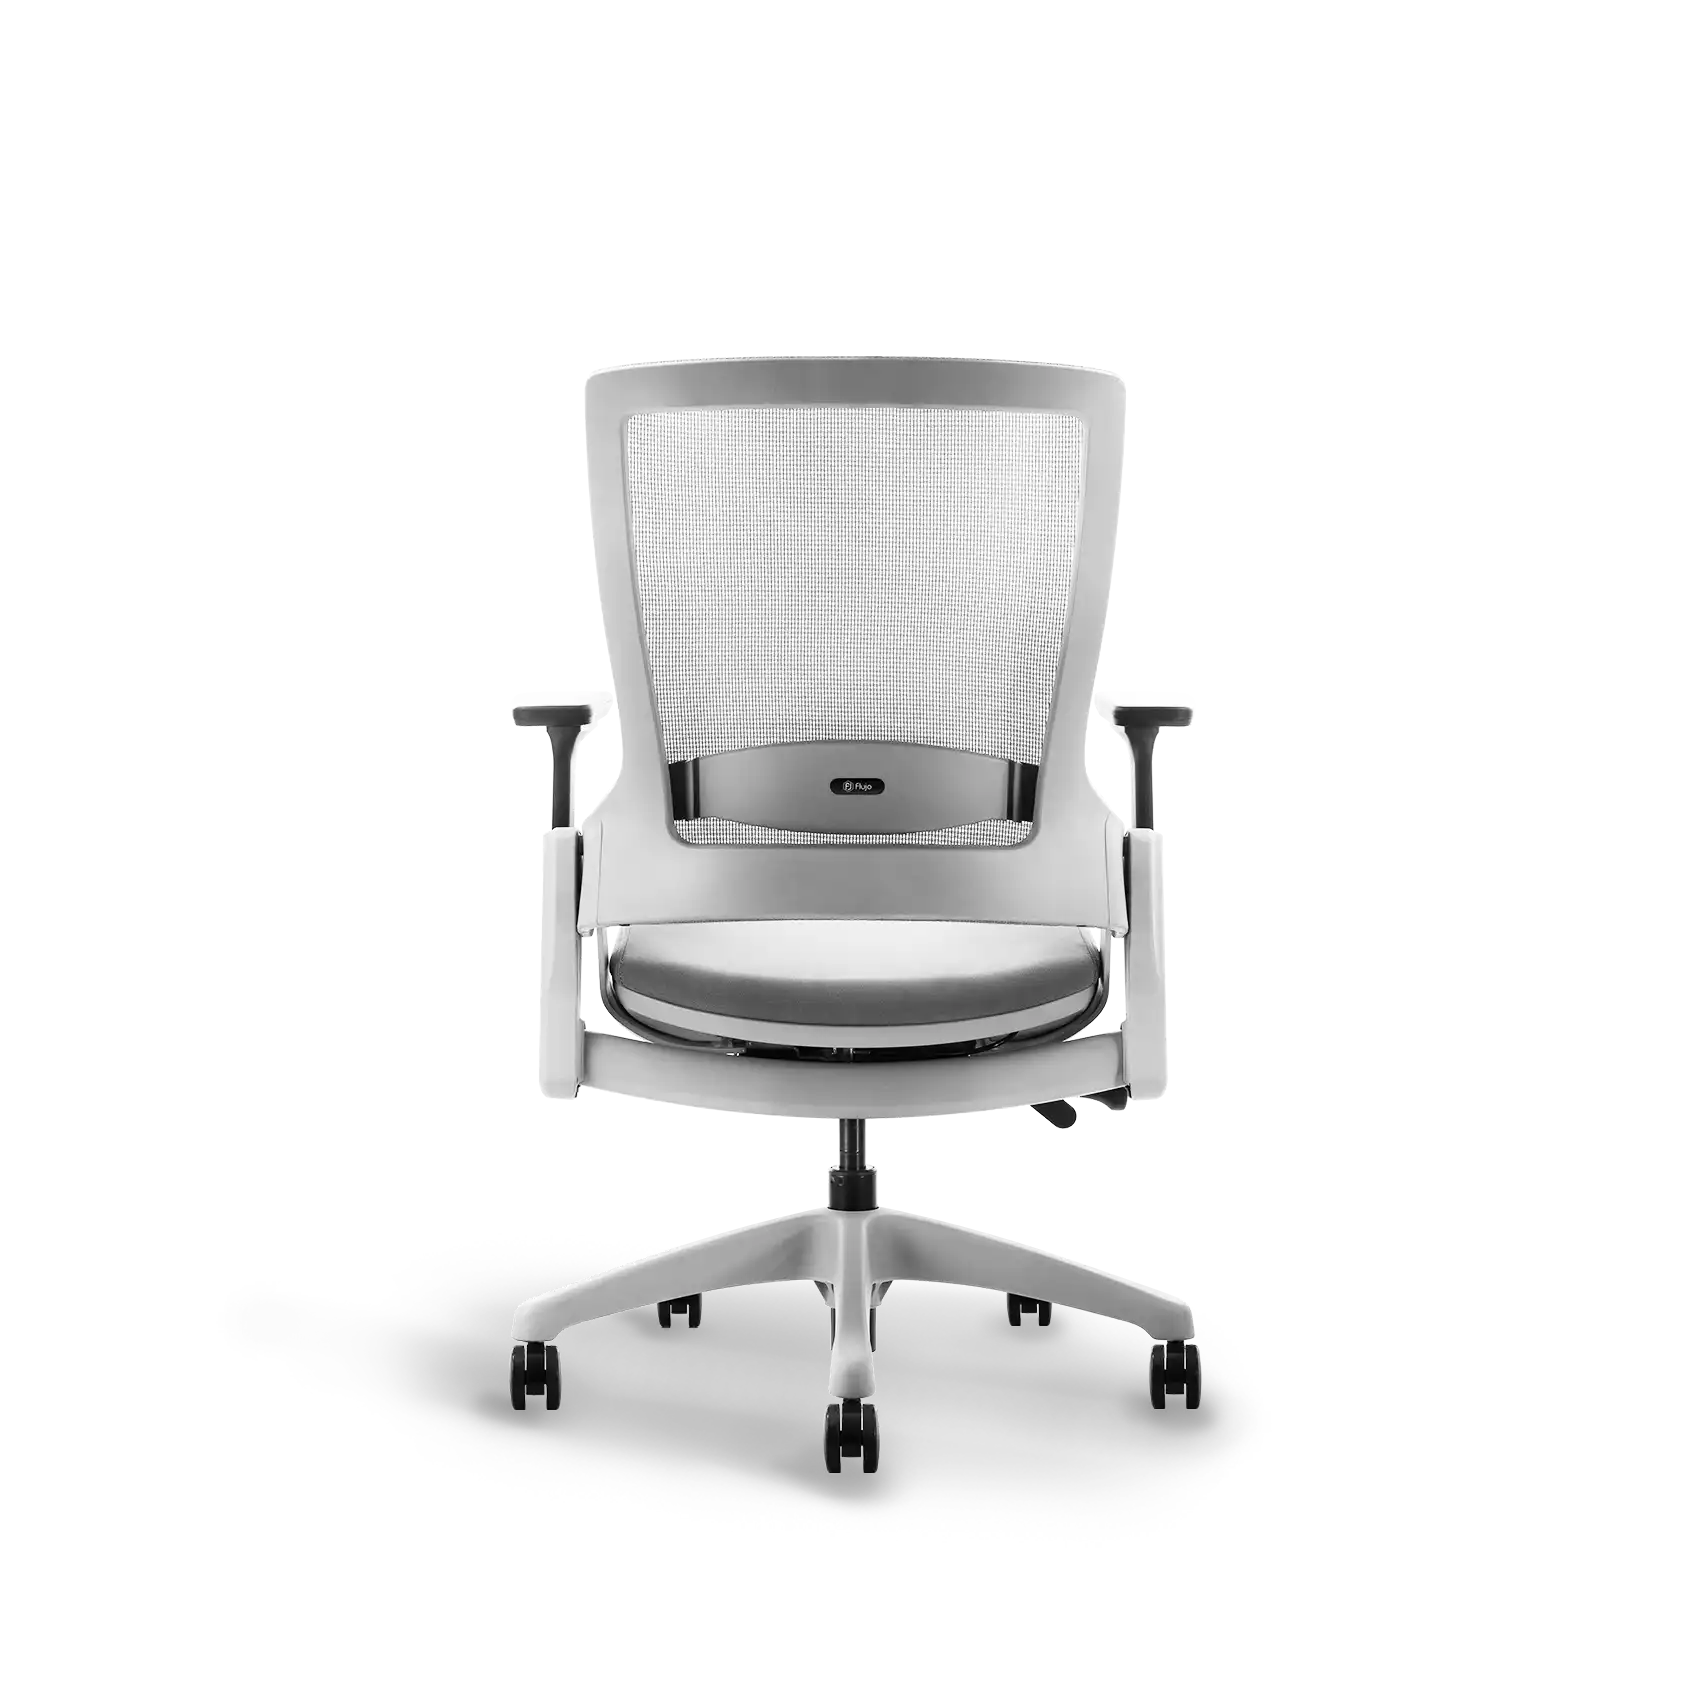 Flujo Angulo ergonomic office chair in grey without headrest, back view